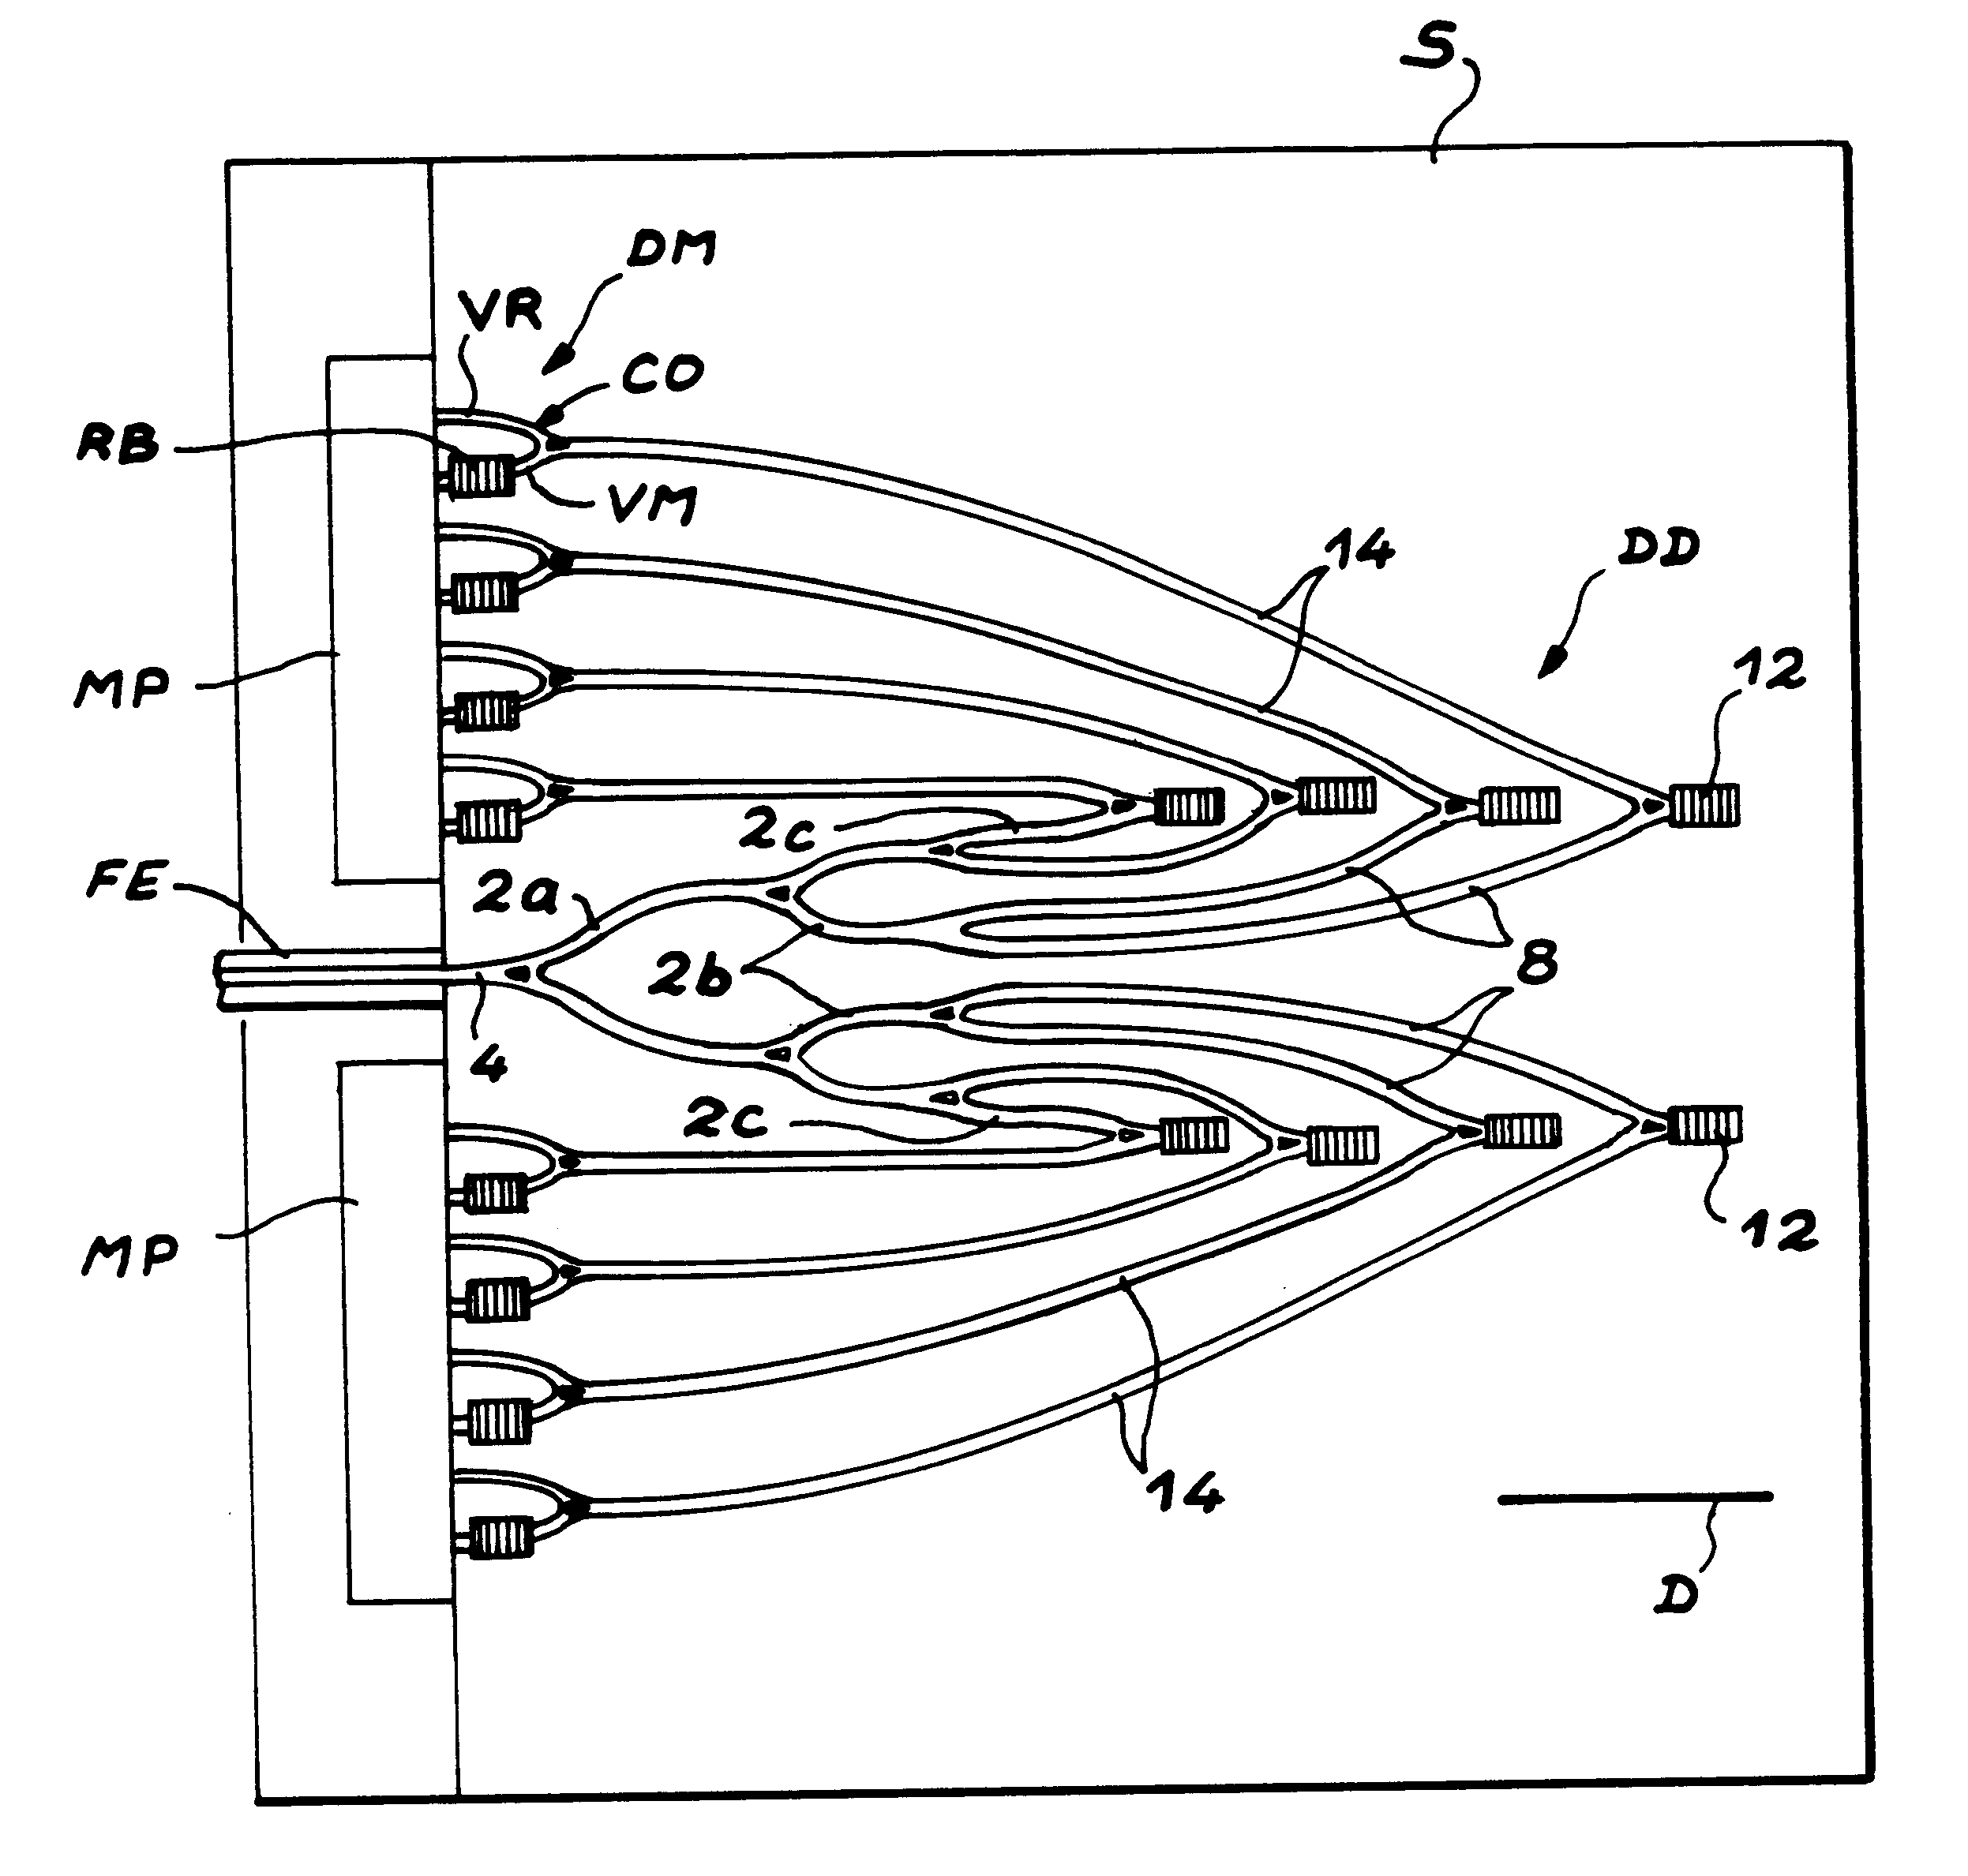 Device for reading spectral lines contained in an optical spectrum